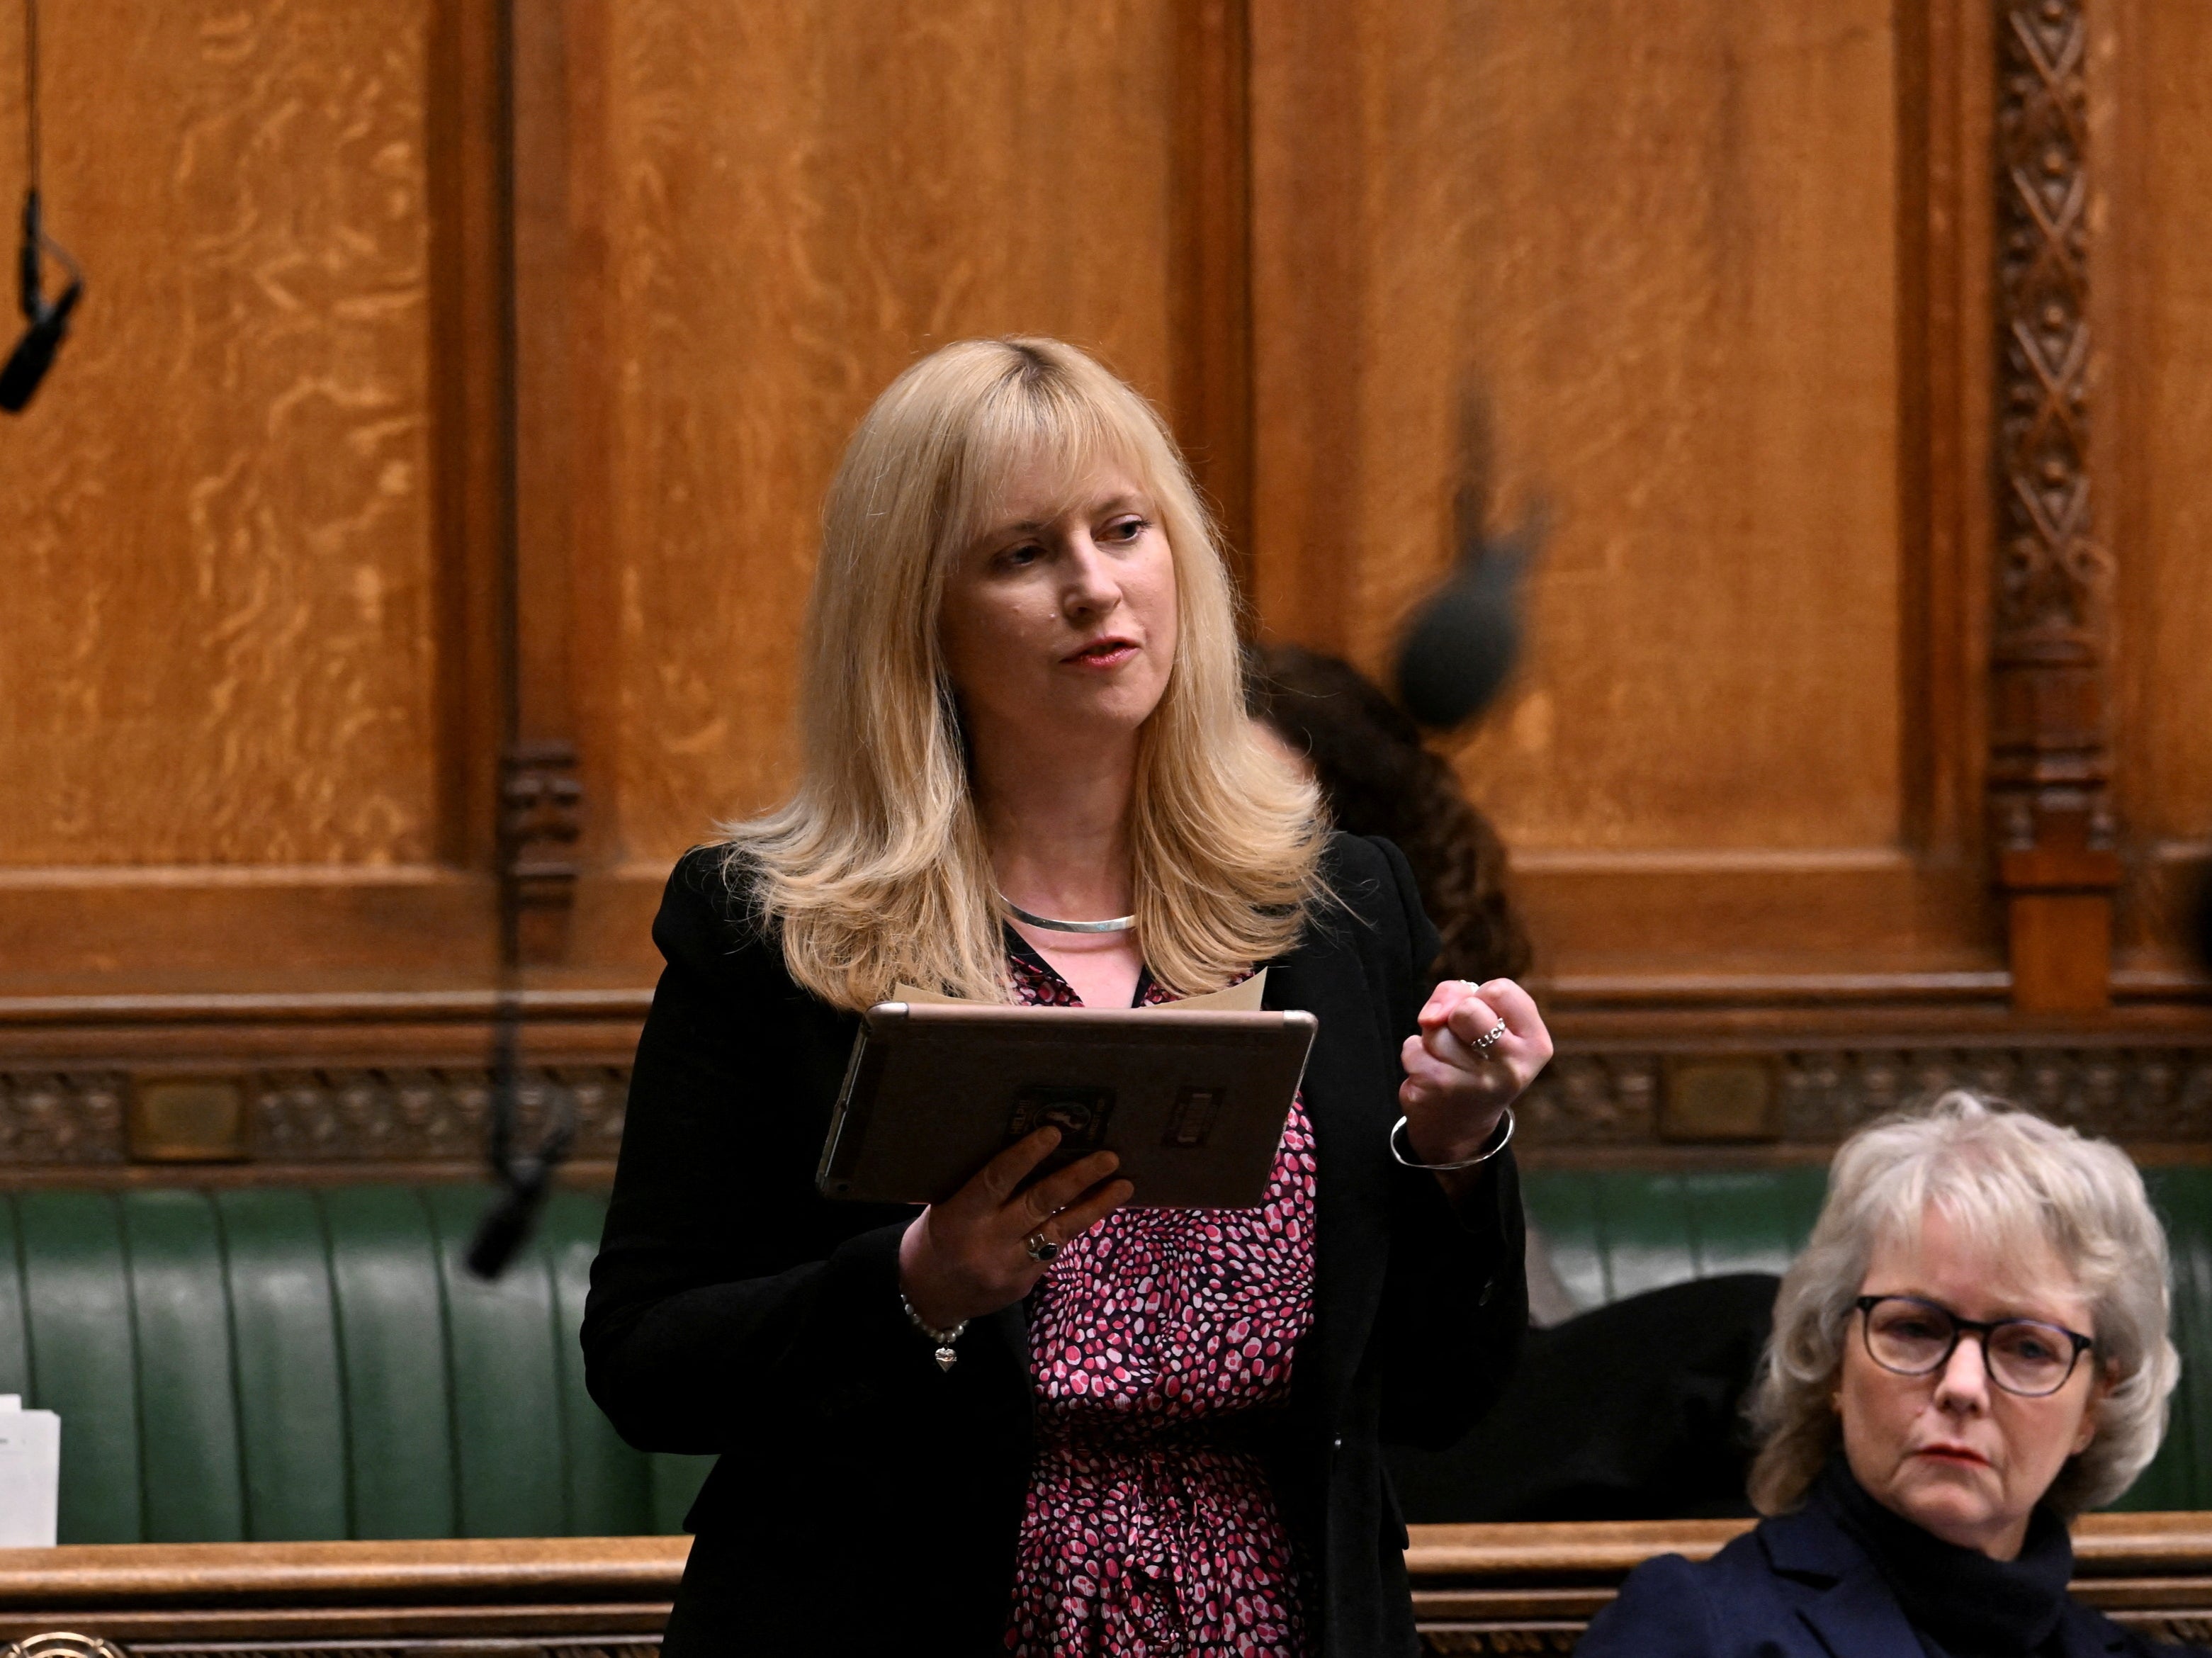 Rosie Duffield has withdrawn from hustings events as she does not feel safe